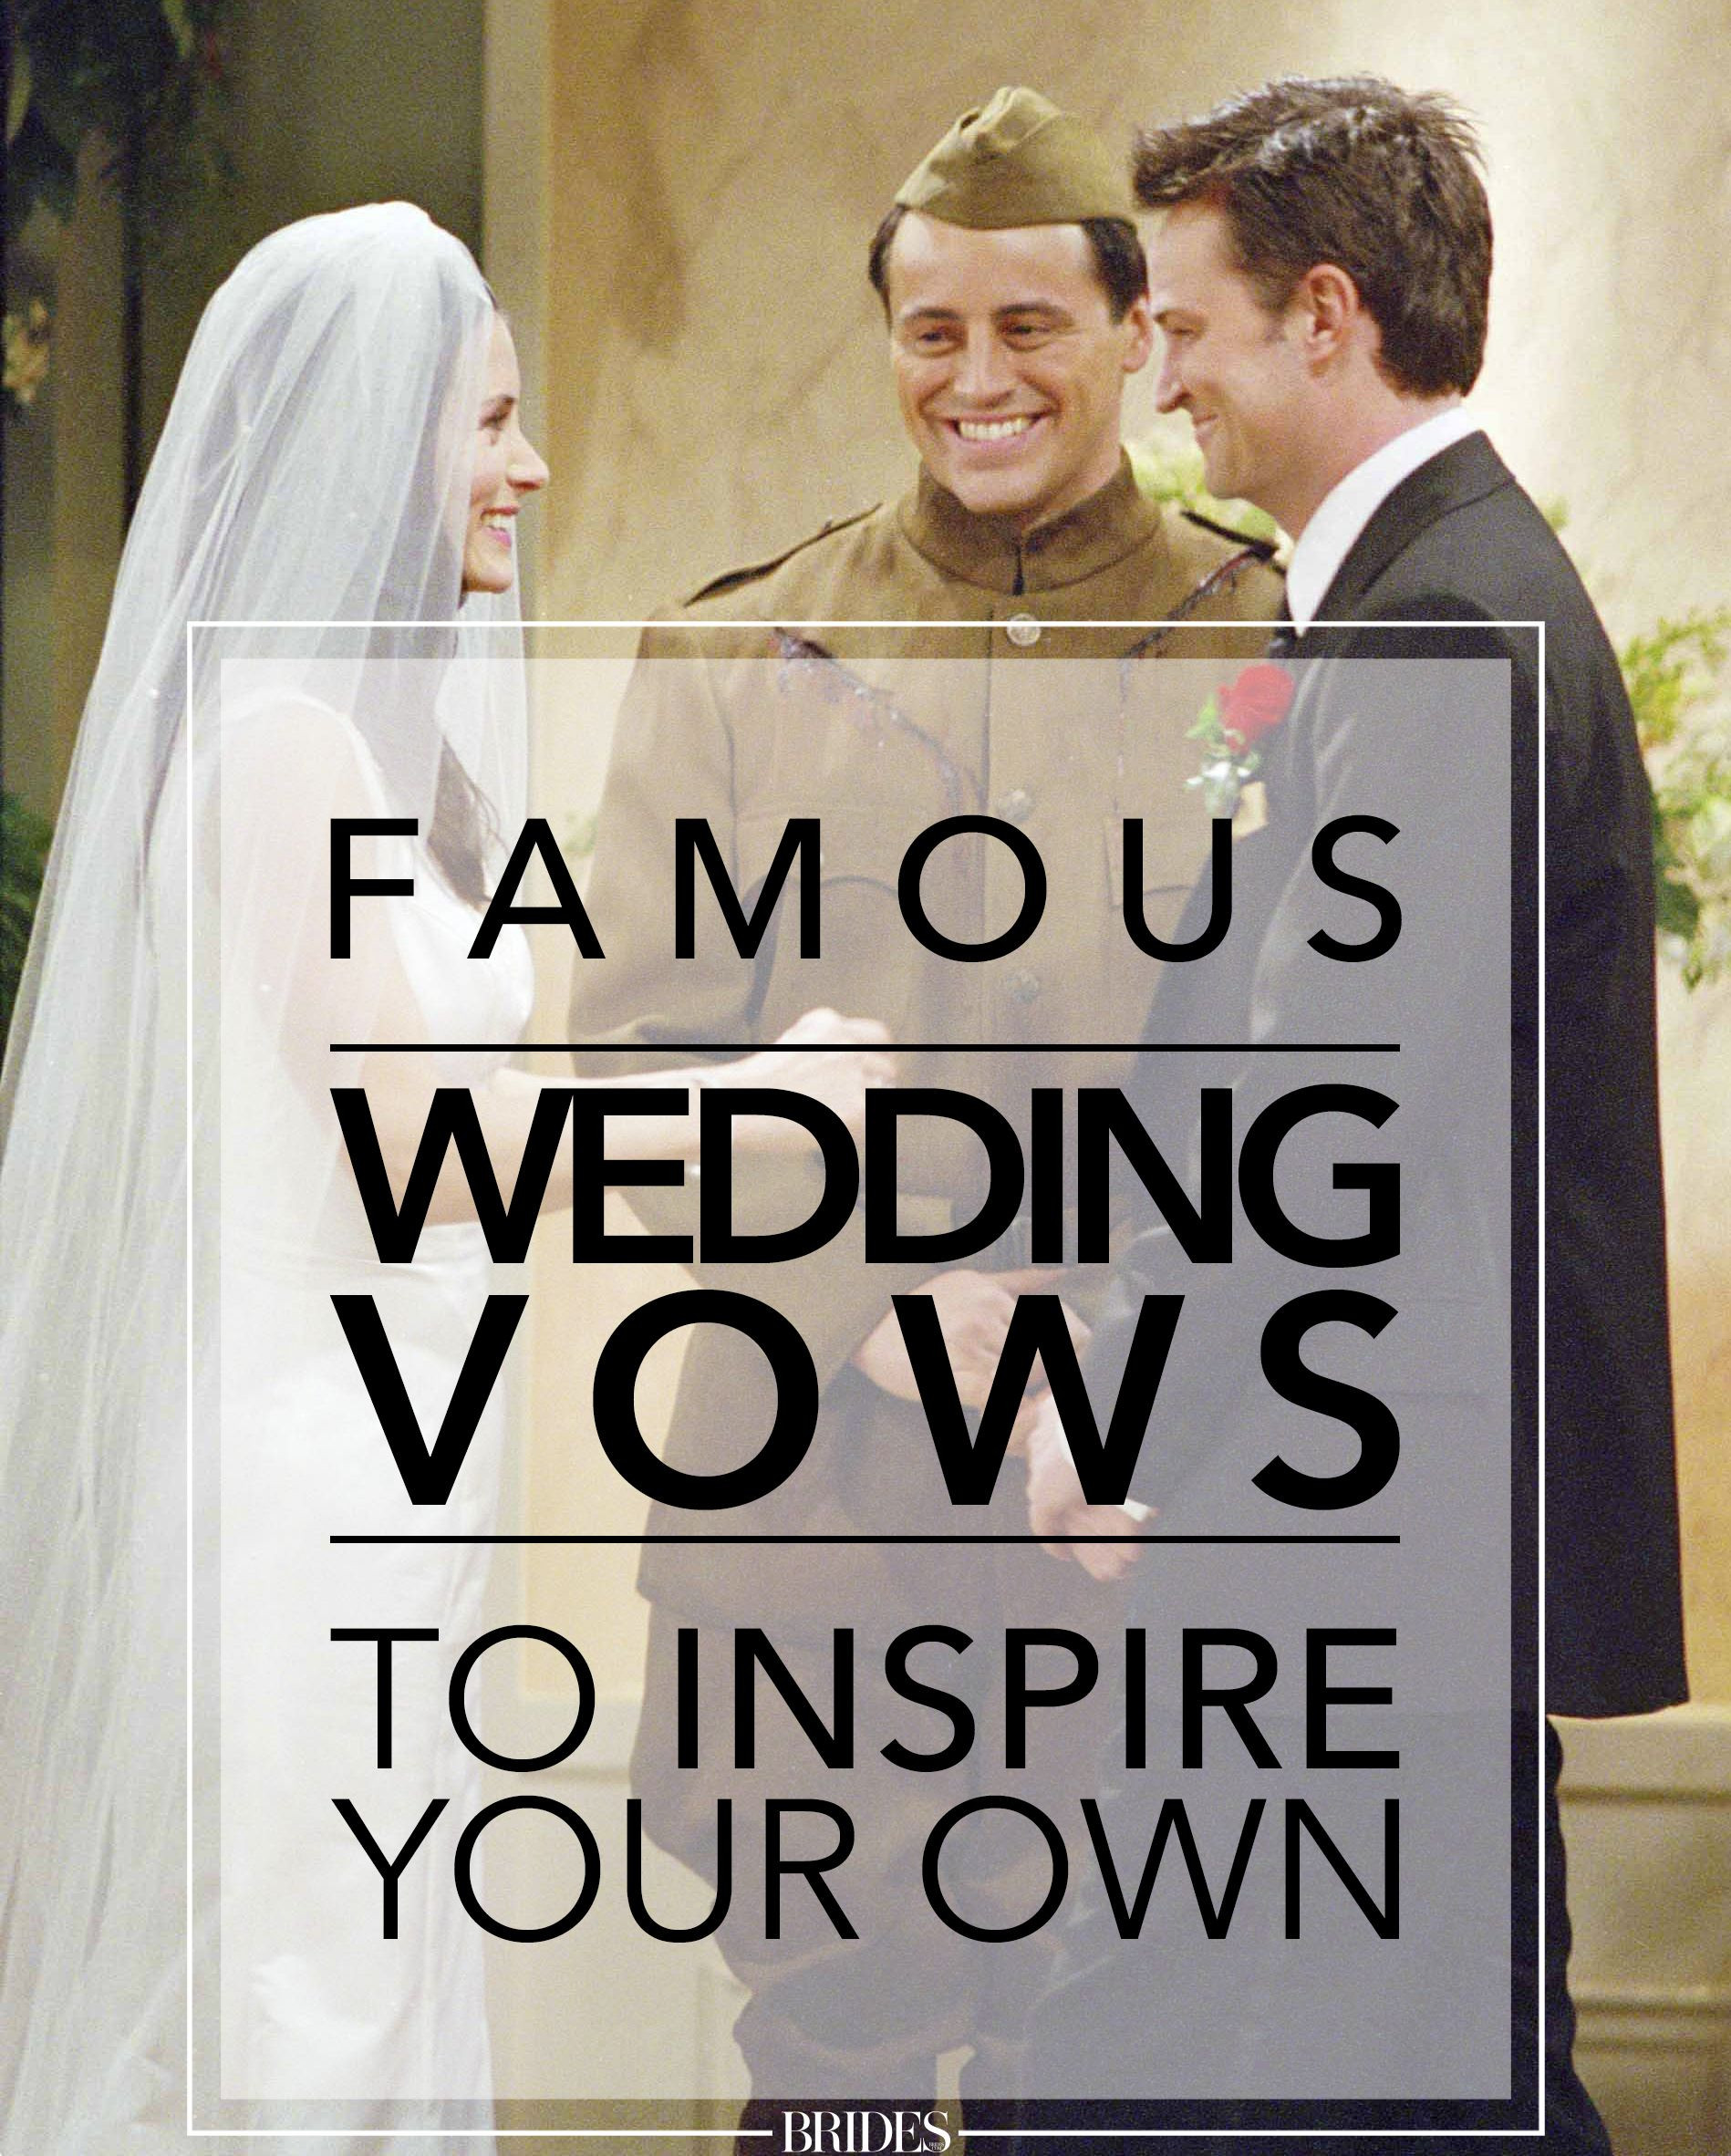 Best Wedding Vows From Movies
 20 Famous Wedding Vows from Movies and TV to Inspire Your